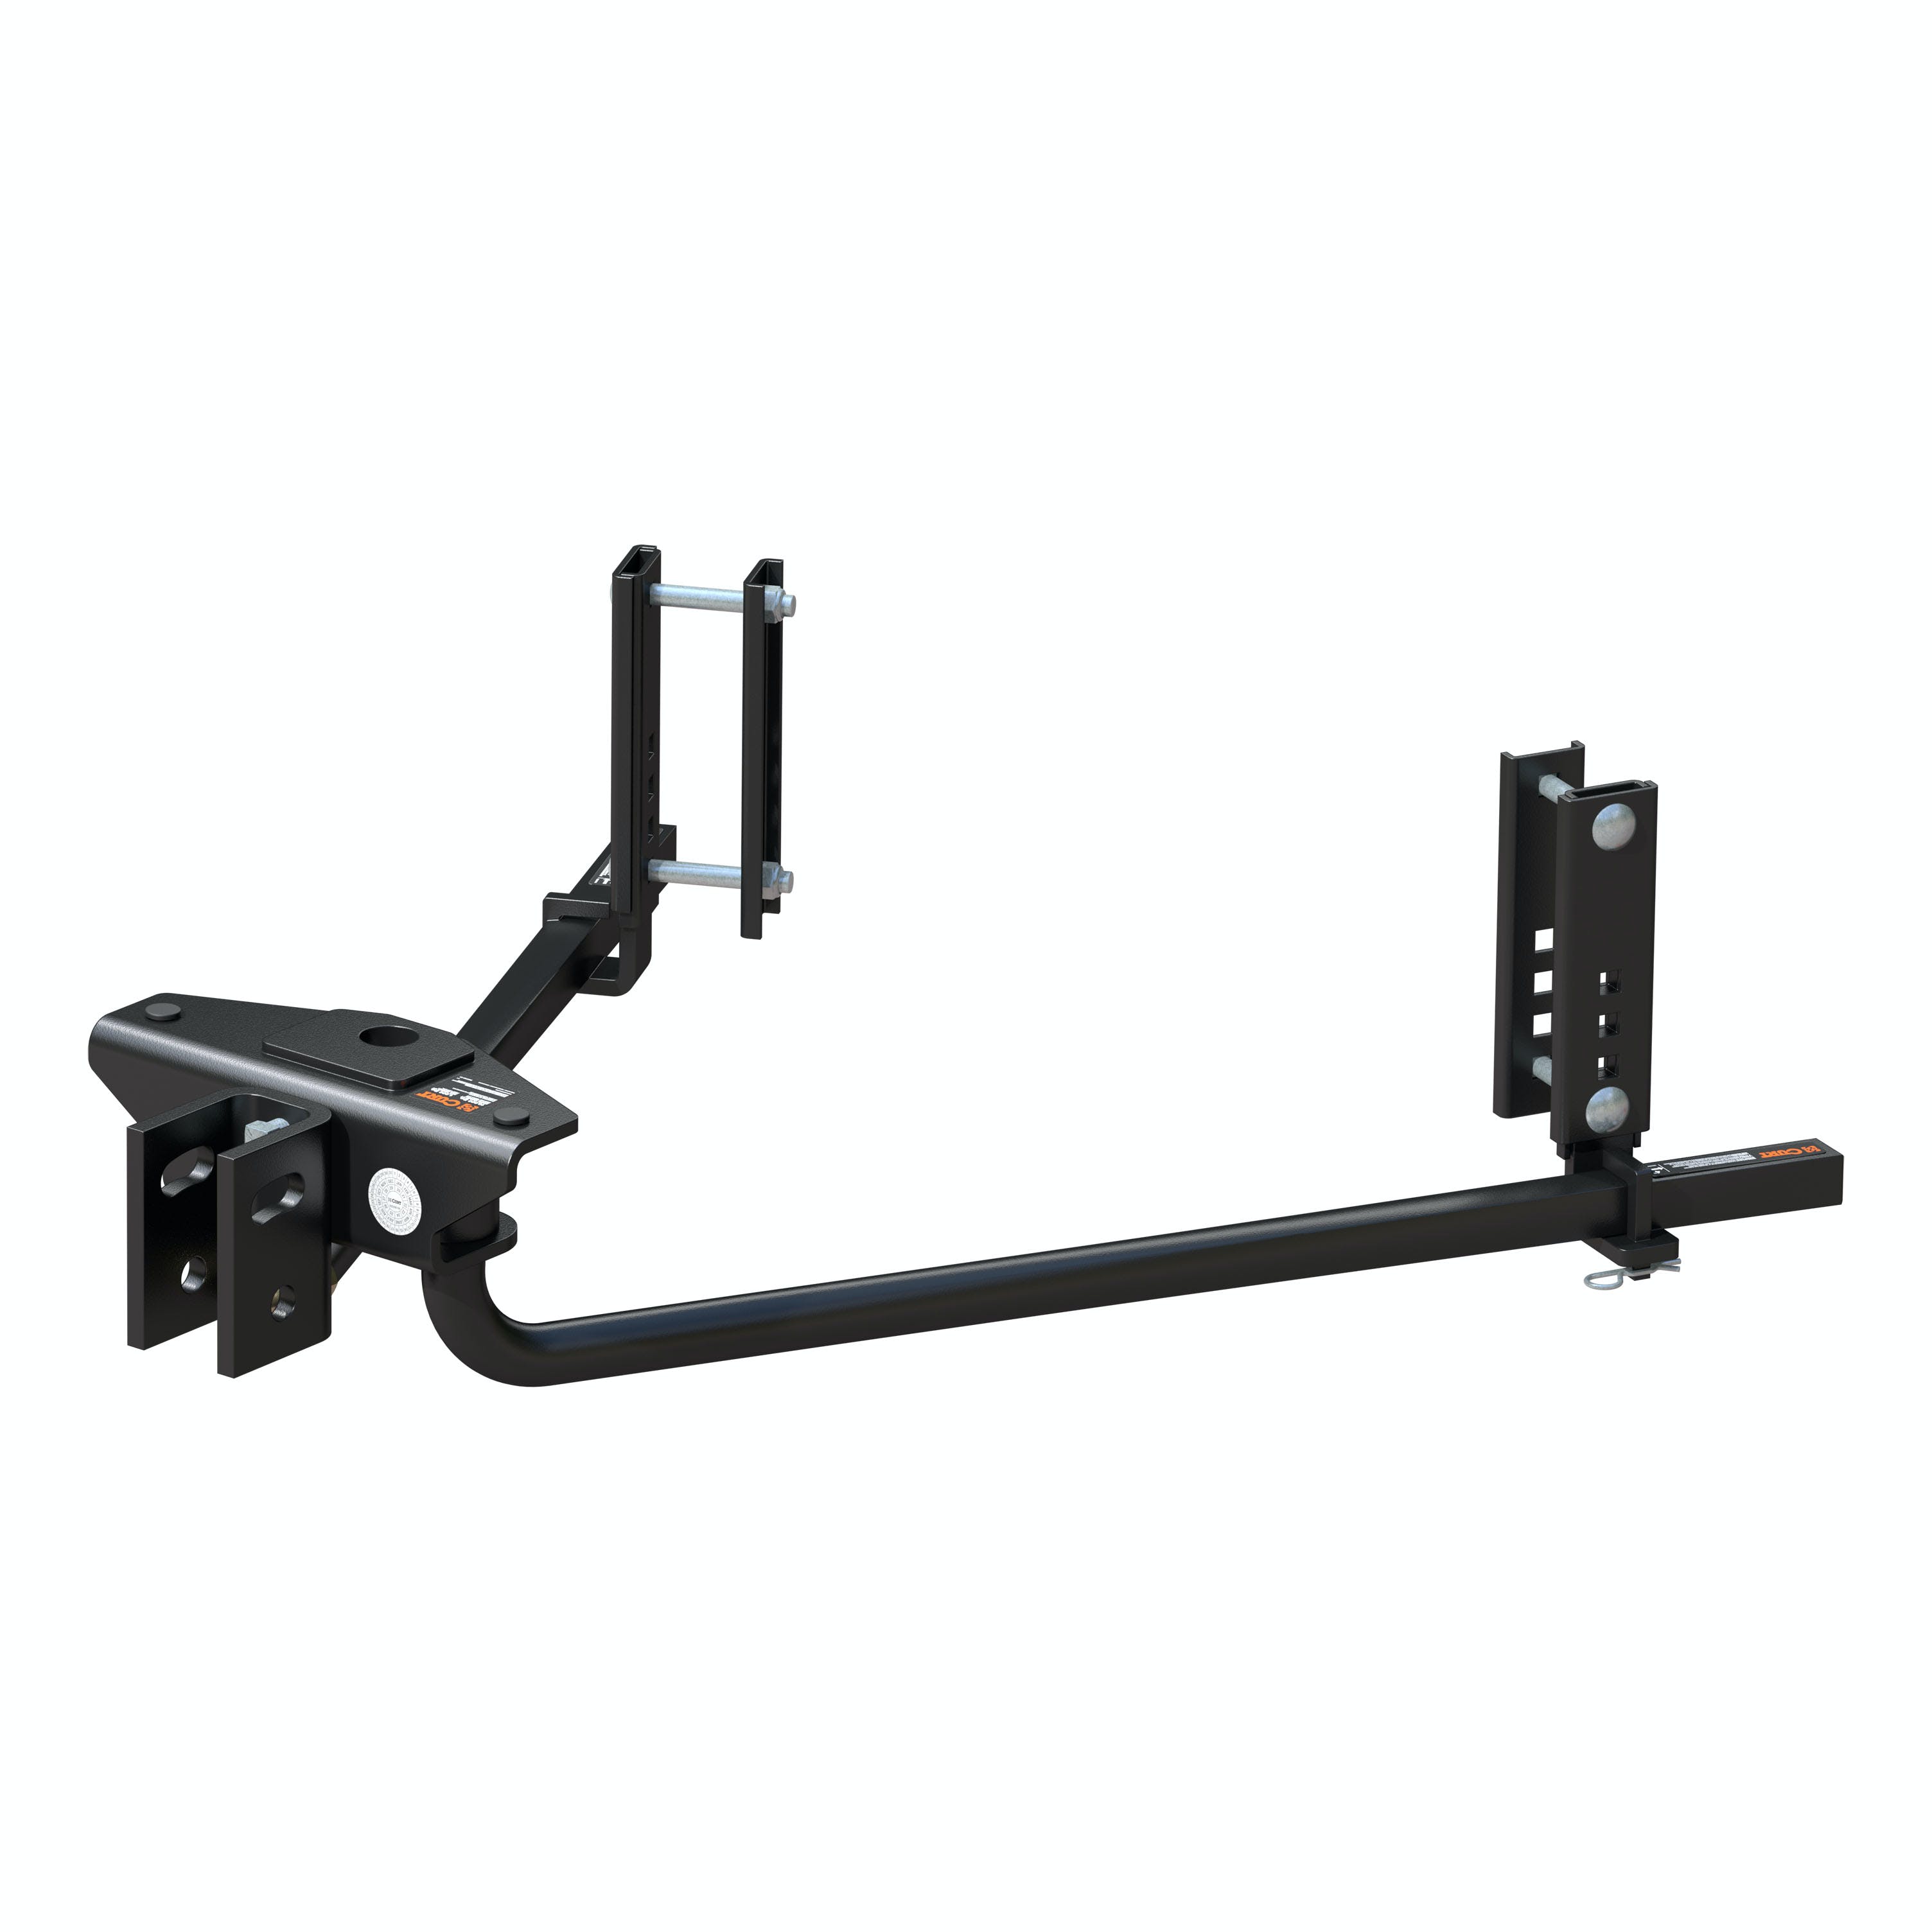 CURT 17600 TruTrack 2P Weight Distribution Hitch with 2x Sway Control, 8-10K (No Shank)